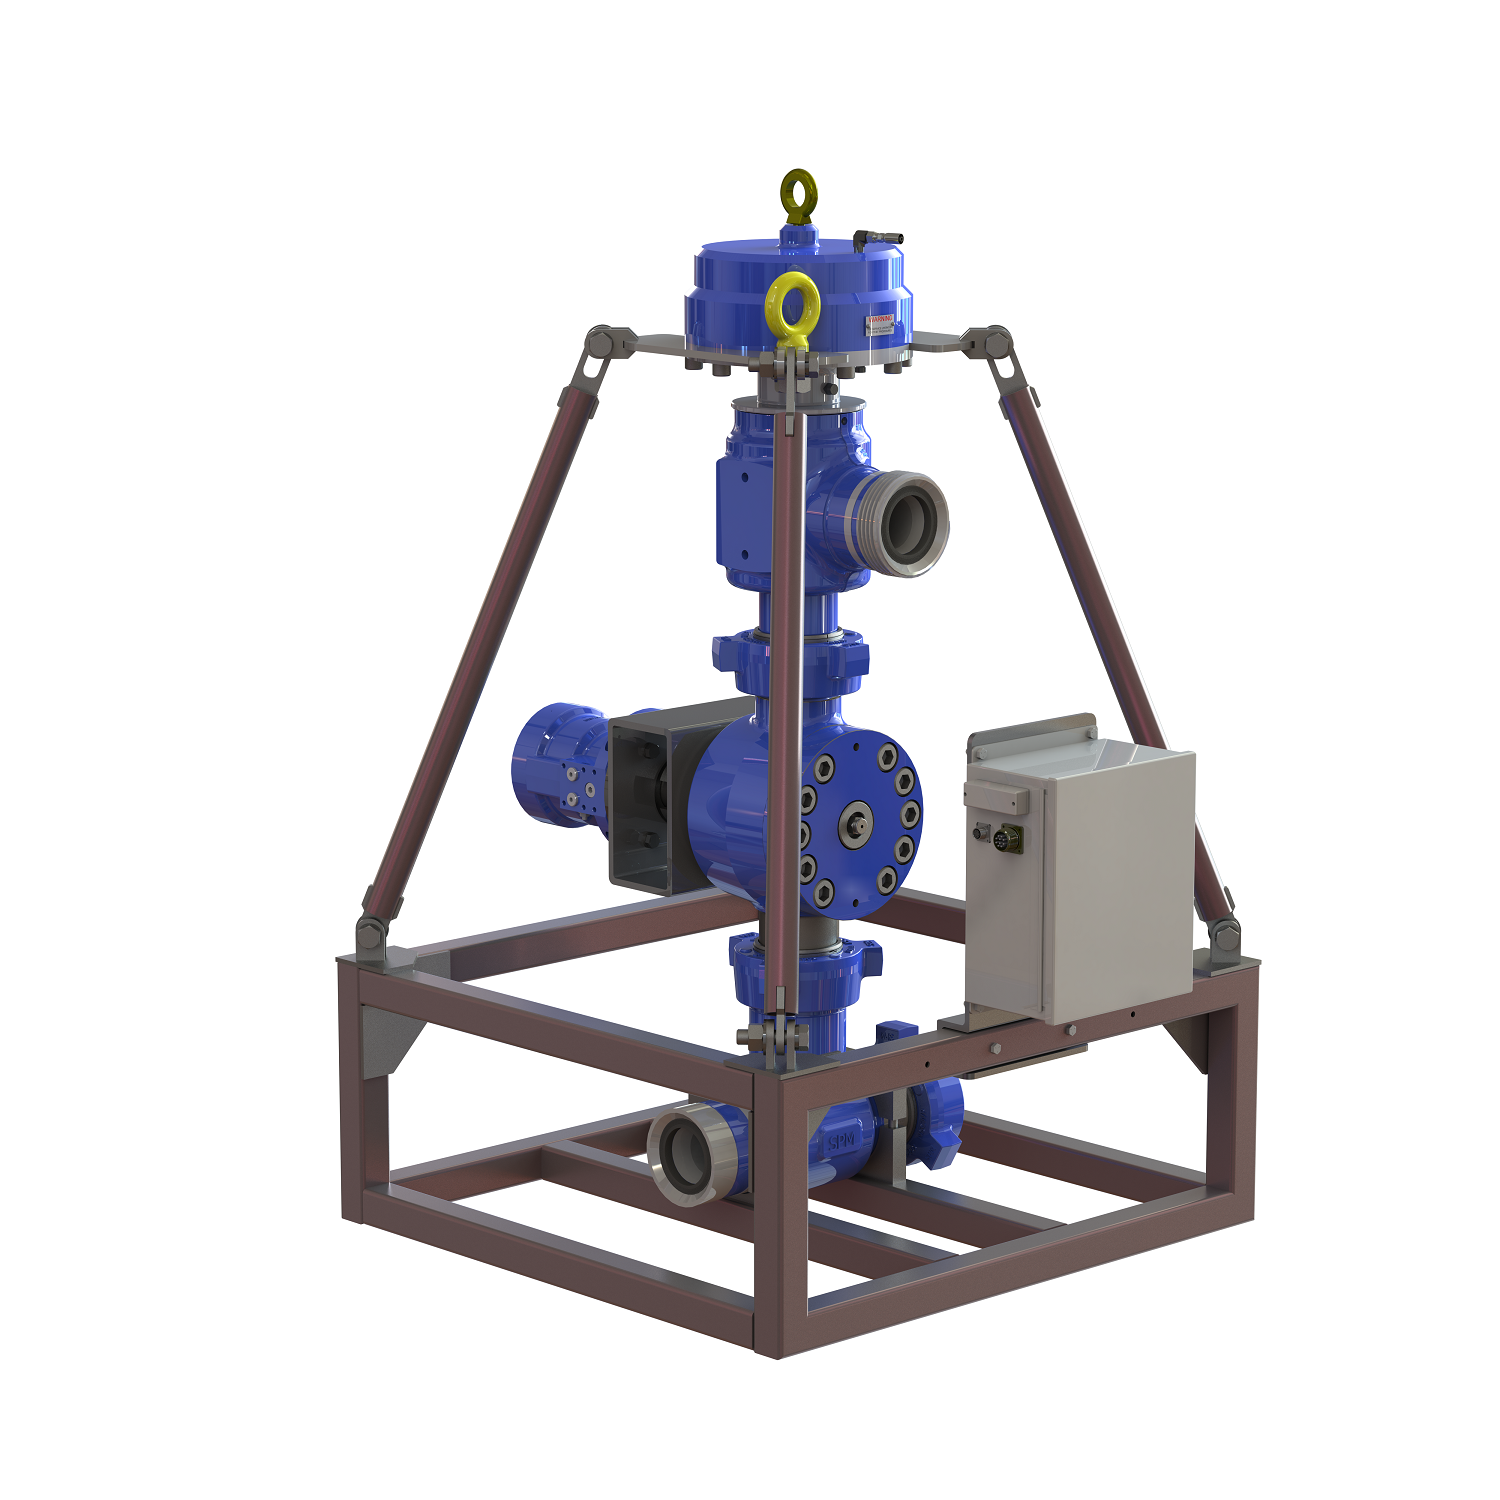 Weir Oil and Gas has introduced its SPM SafeEdge ARC system for the remote setting and digital control of relief valves.